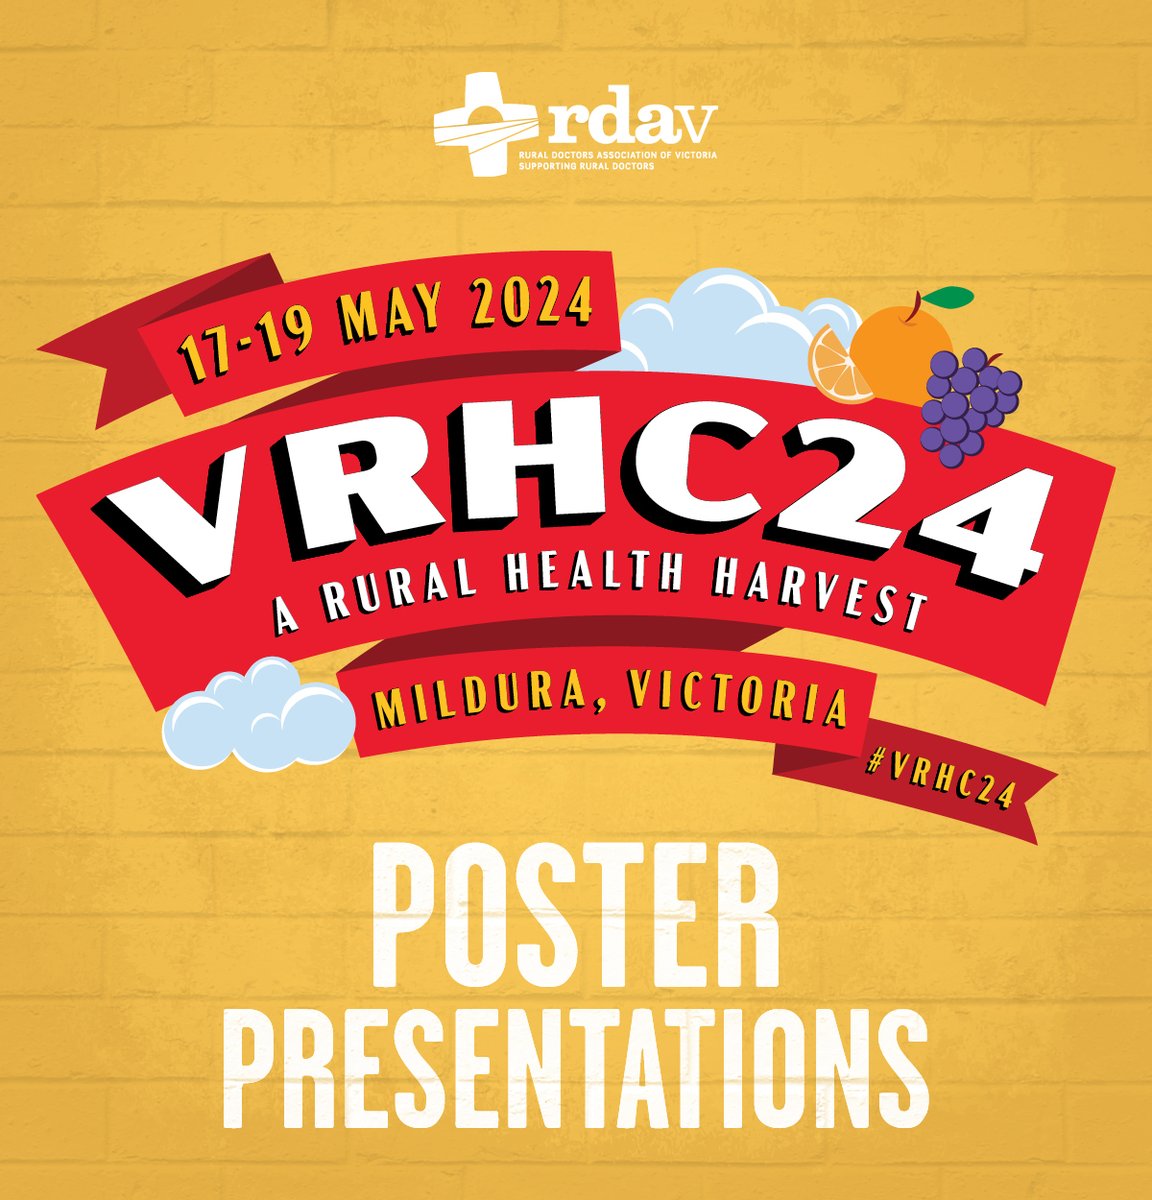 Be part of #VRHC24 - Poster presentations EOIs for the Victorian Rural Health Conference close 31 March 2024. For all the details & #VRHC24 registration bit.ly/476kxt4